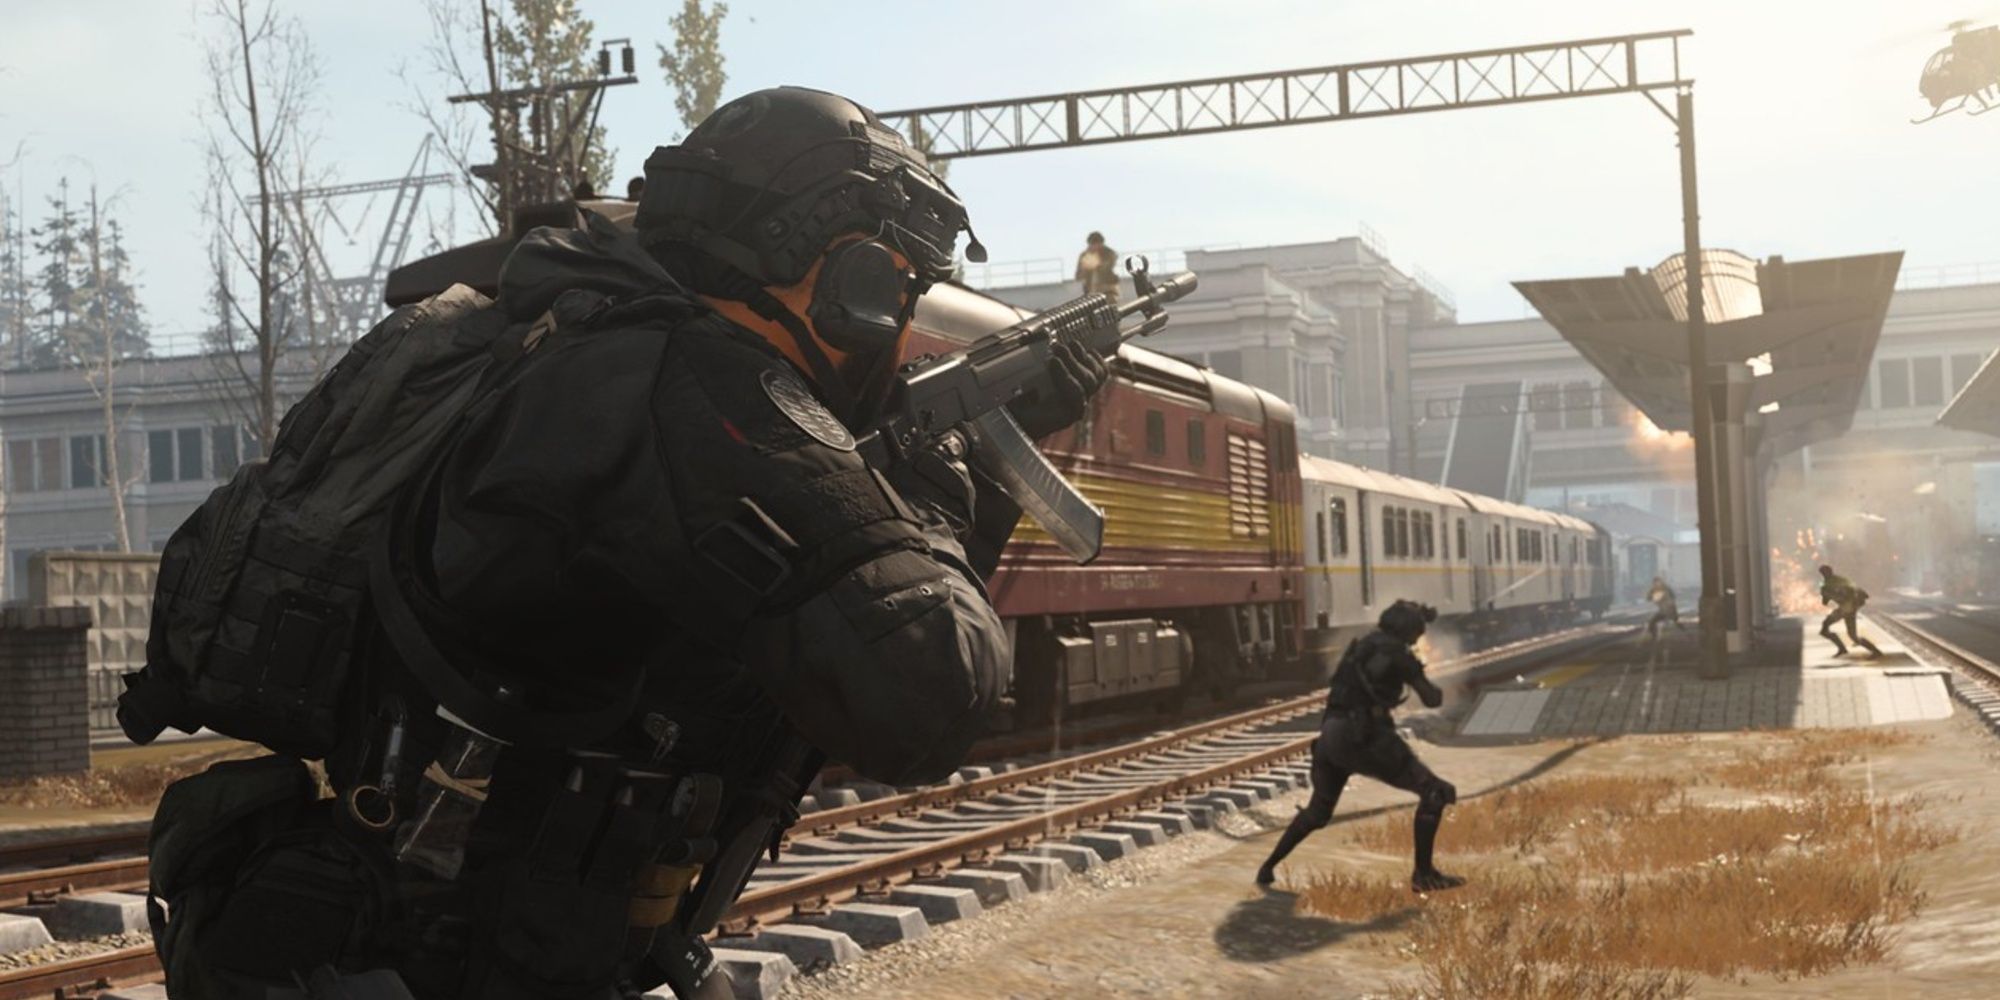 enemies fighting by the train, warzone